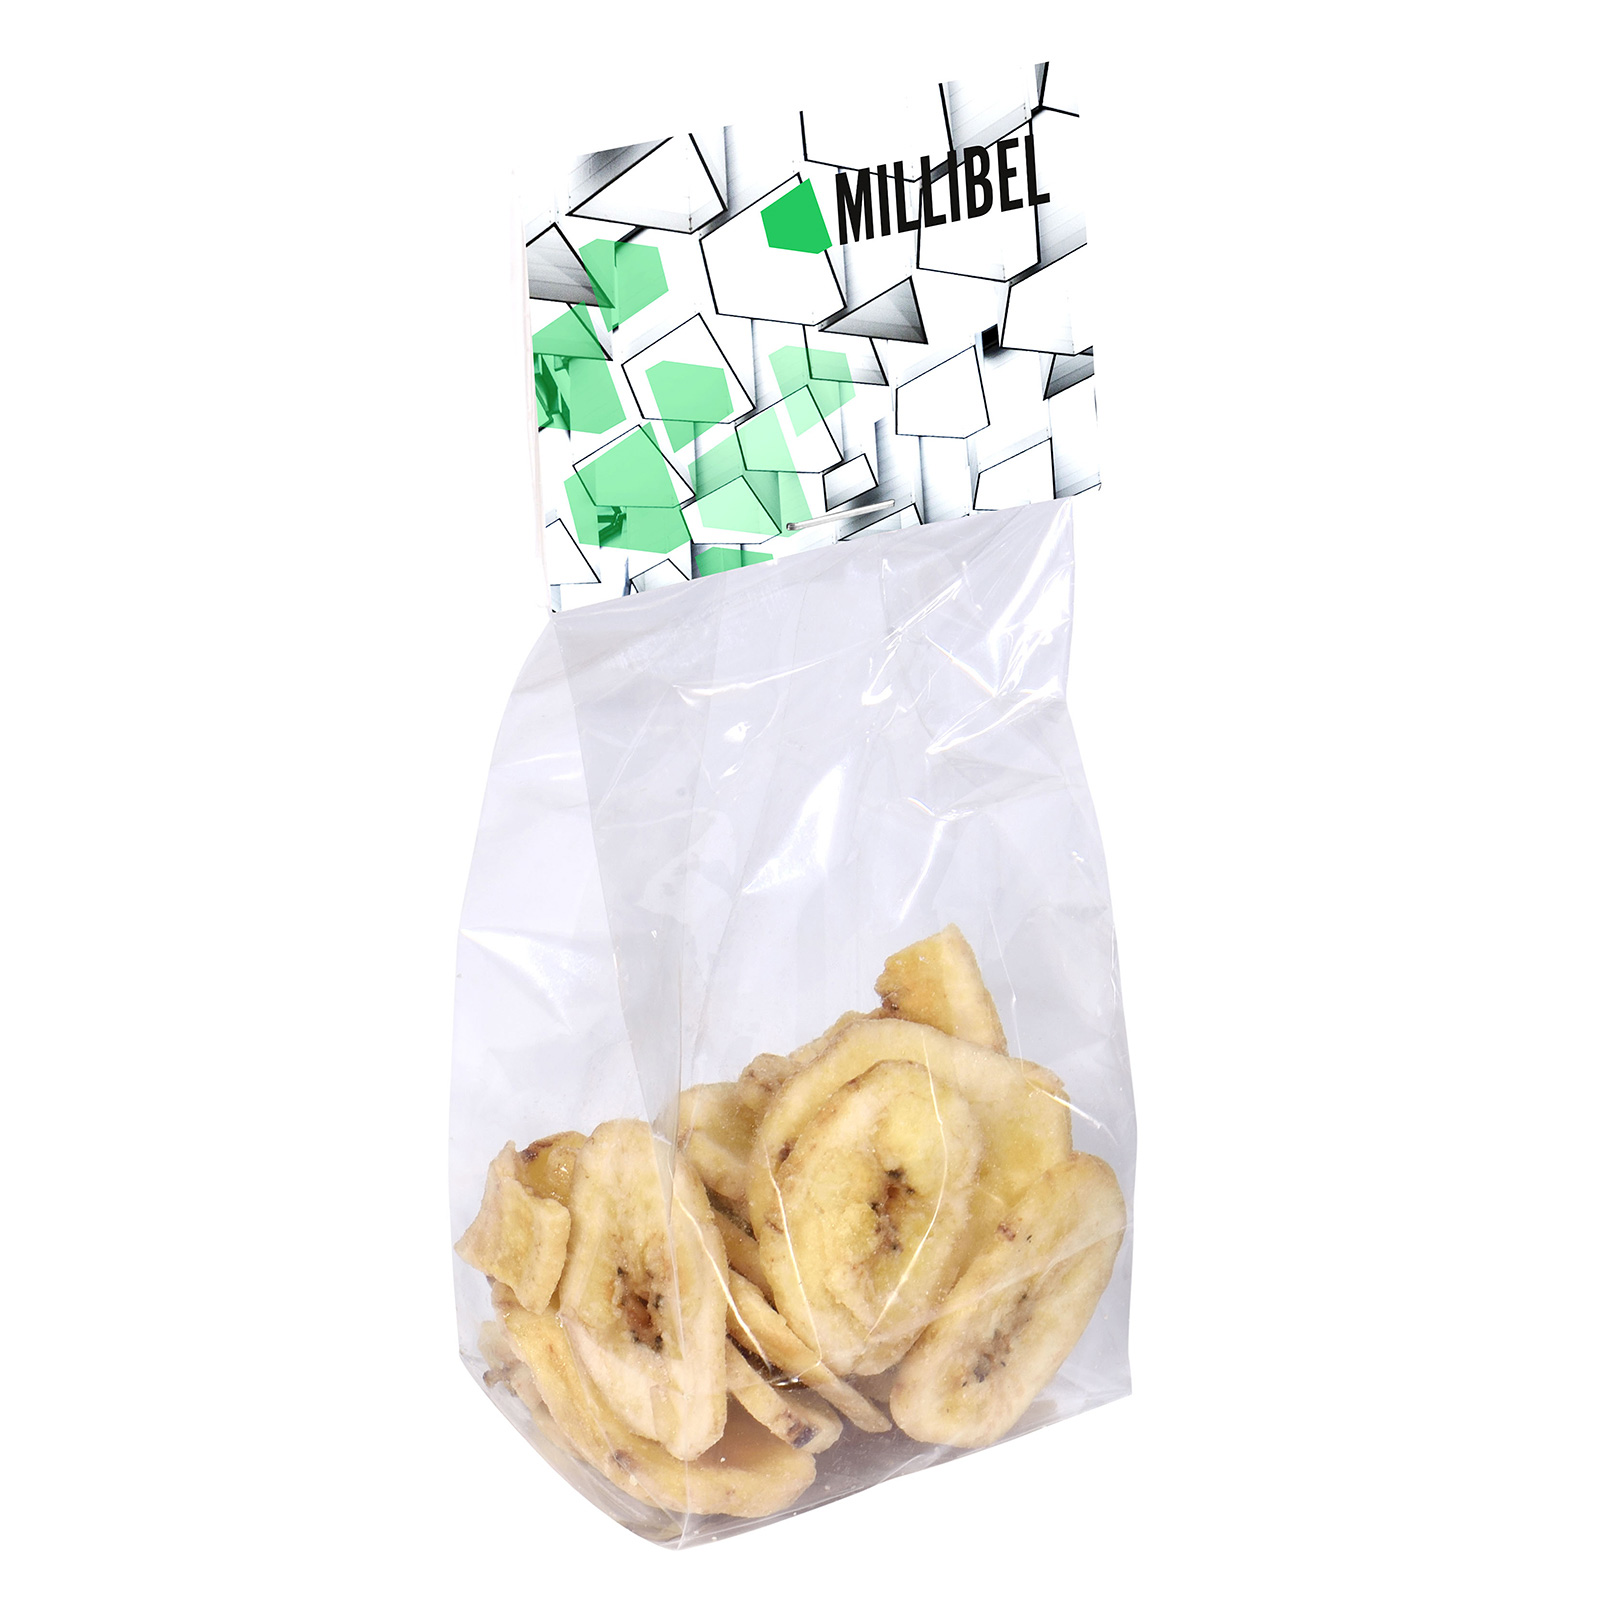 A clear bag filled with banana chips - Honeybourne - Warblington